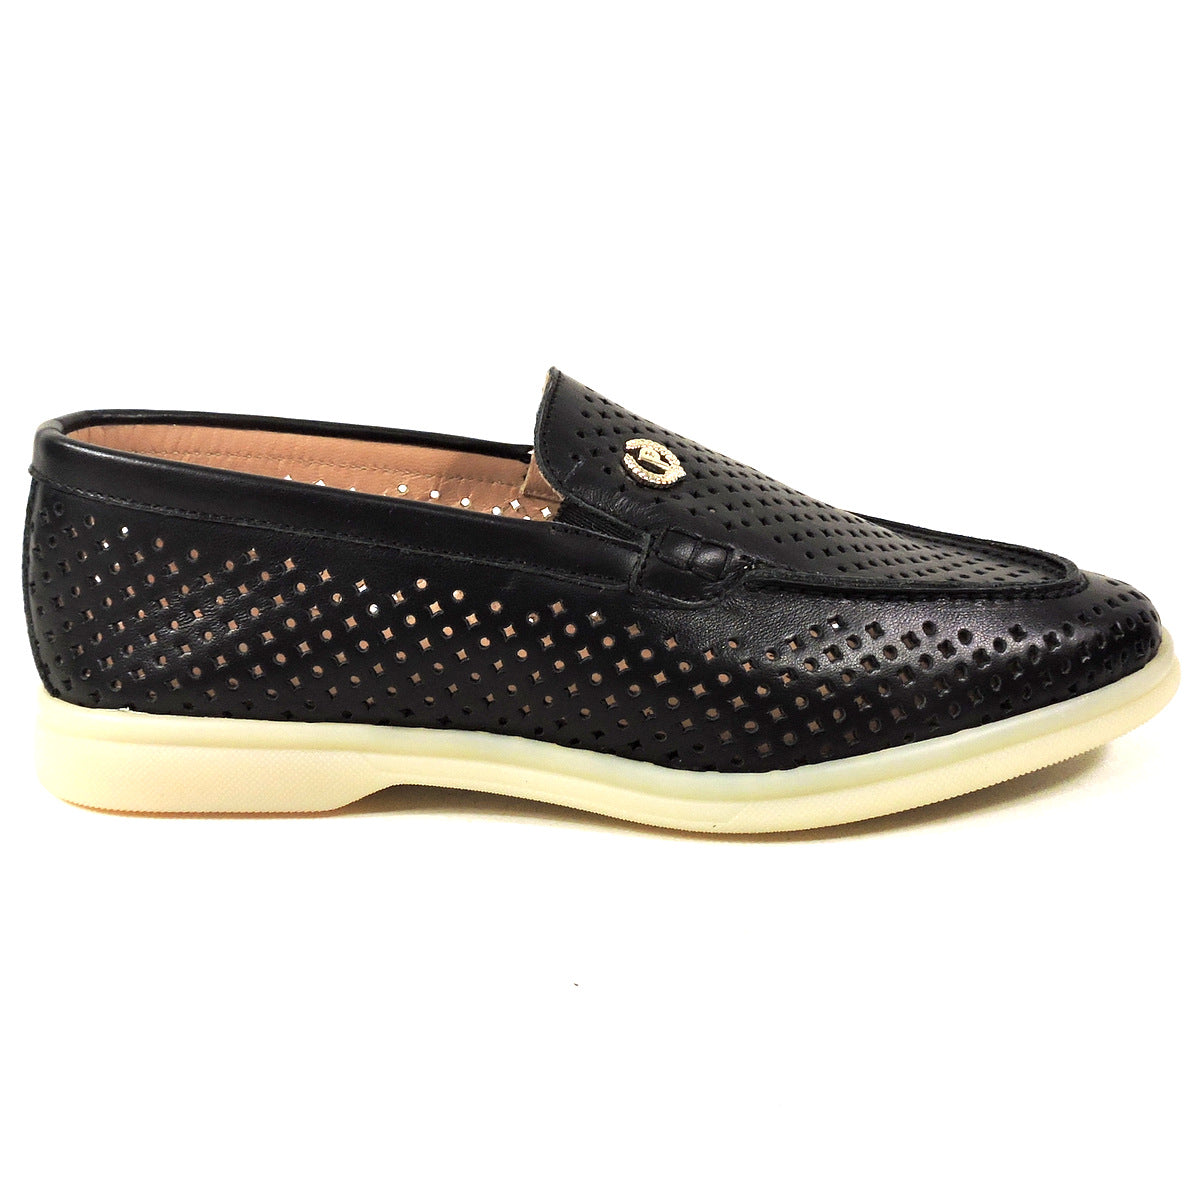 POLLINI 🇮🇹 WOMEN'S BLACK LEATHER COMFORT SUMMER LOAFERS